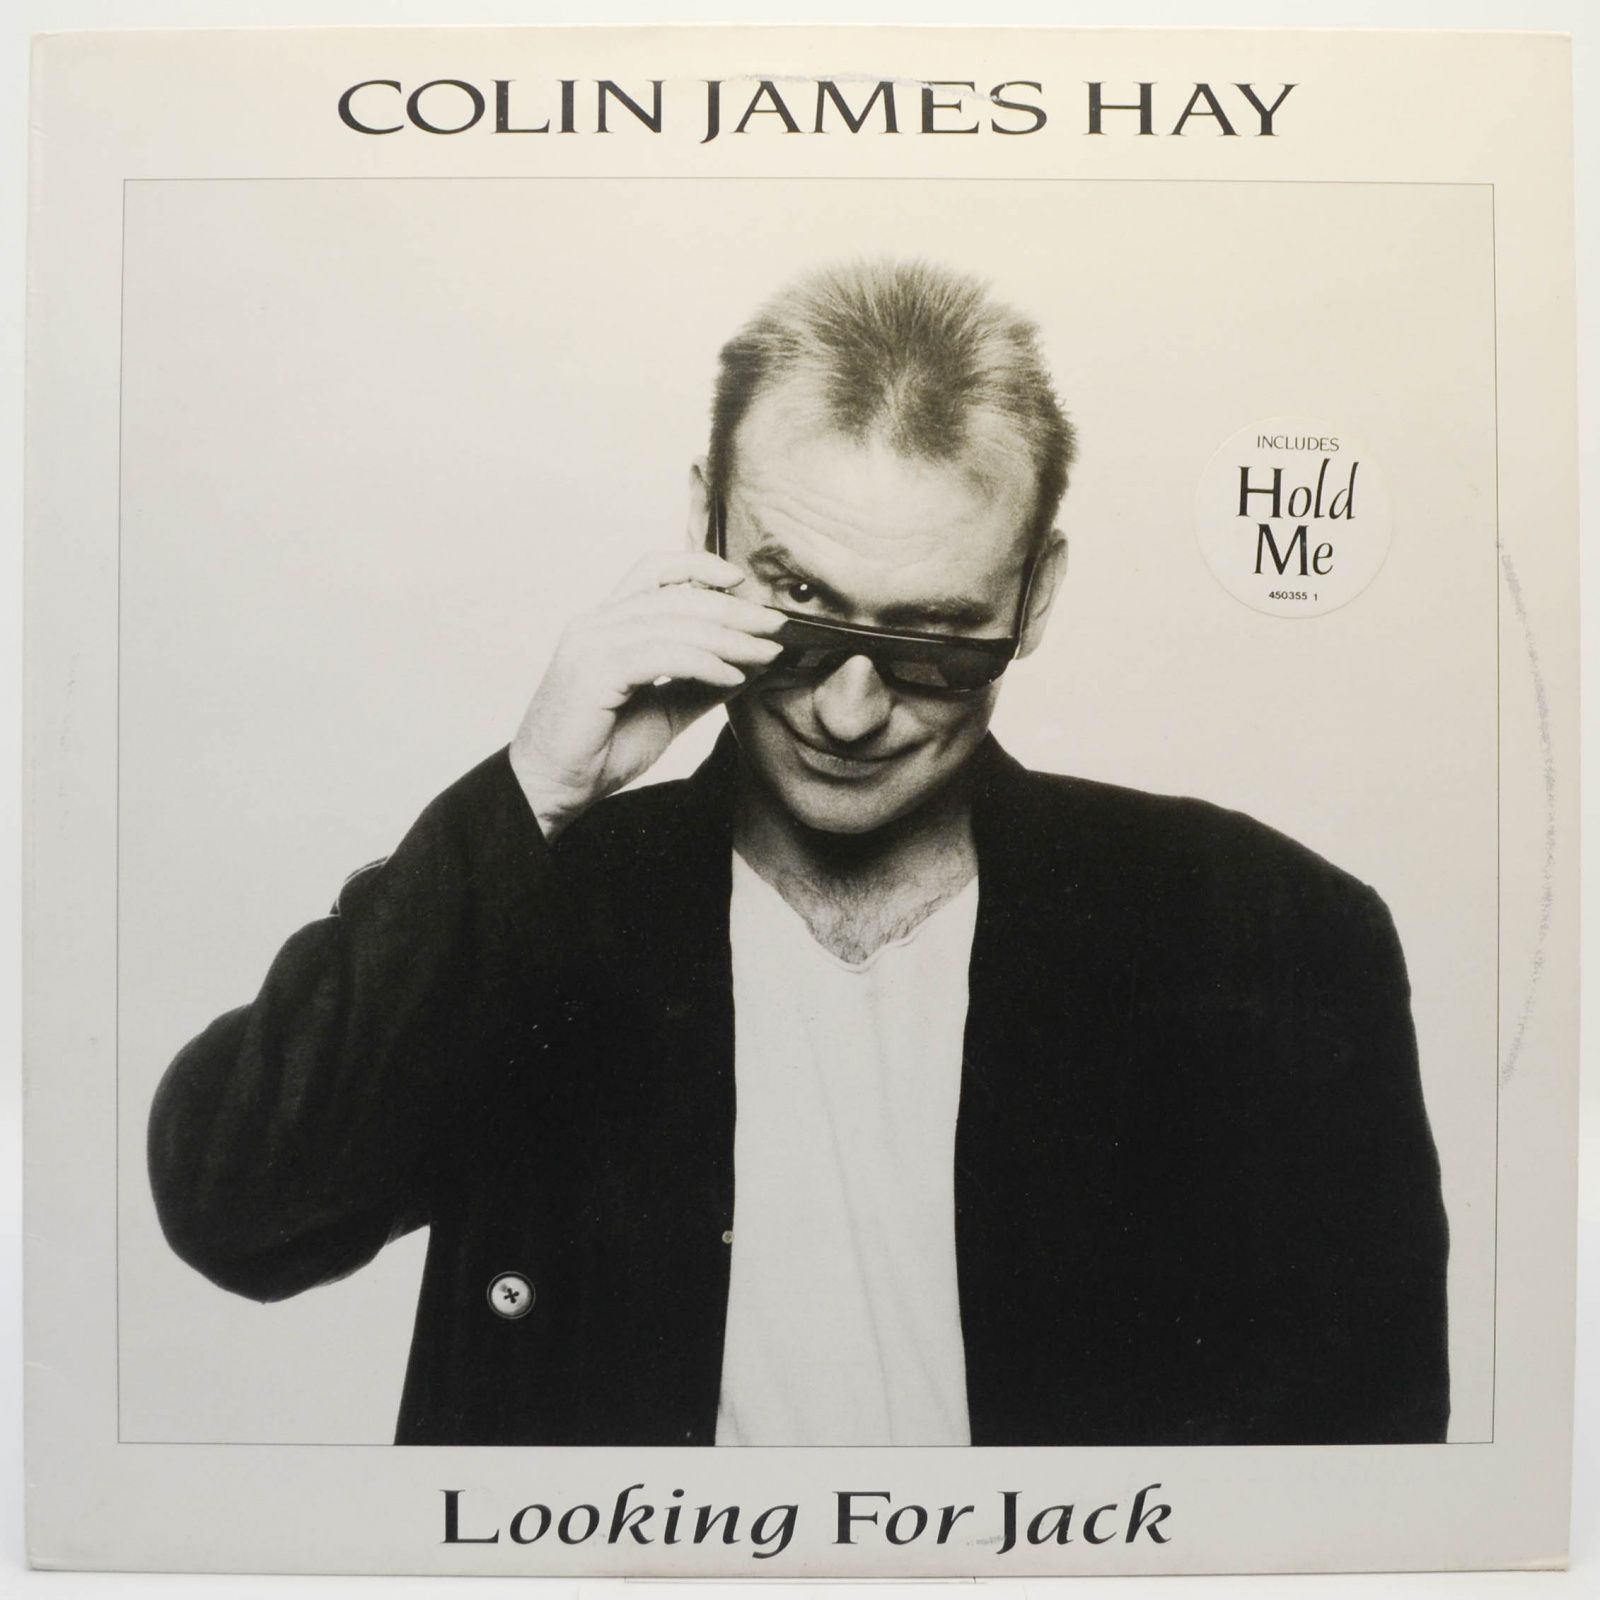 Colin James Hay — Looking For Jack, 1987